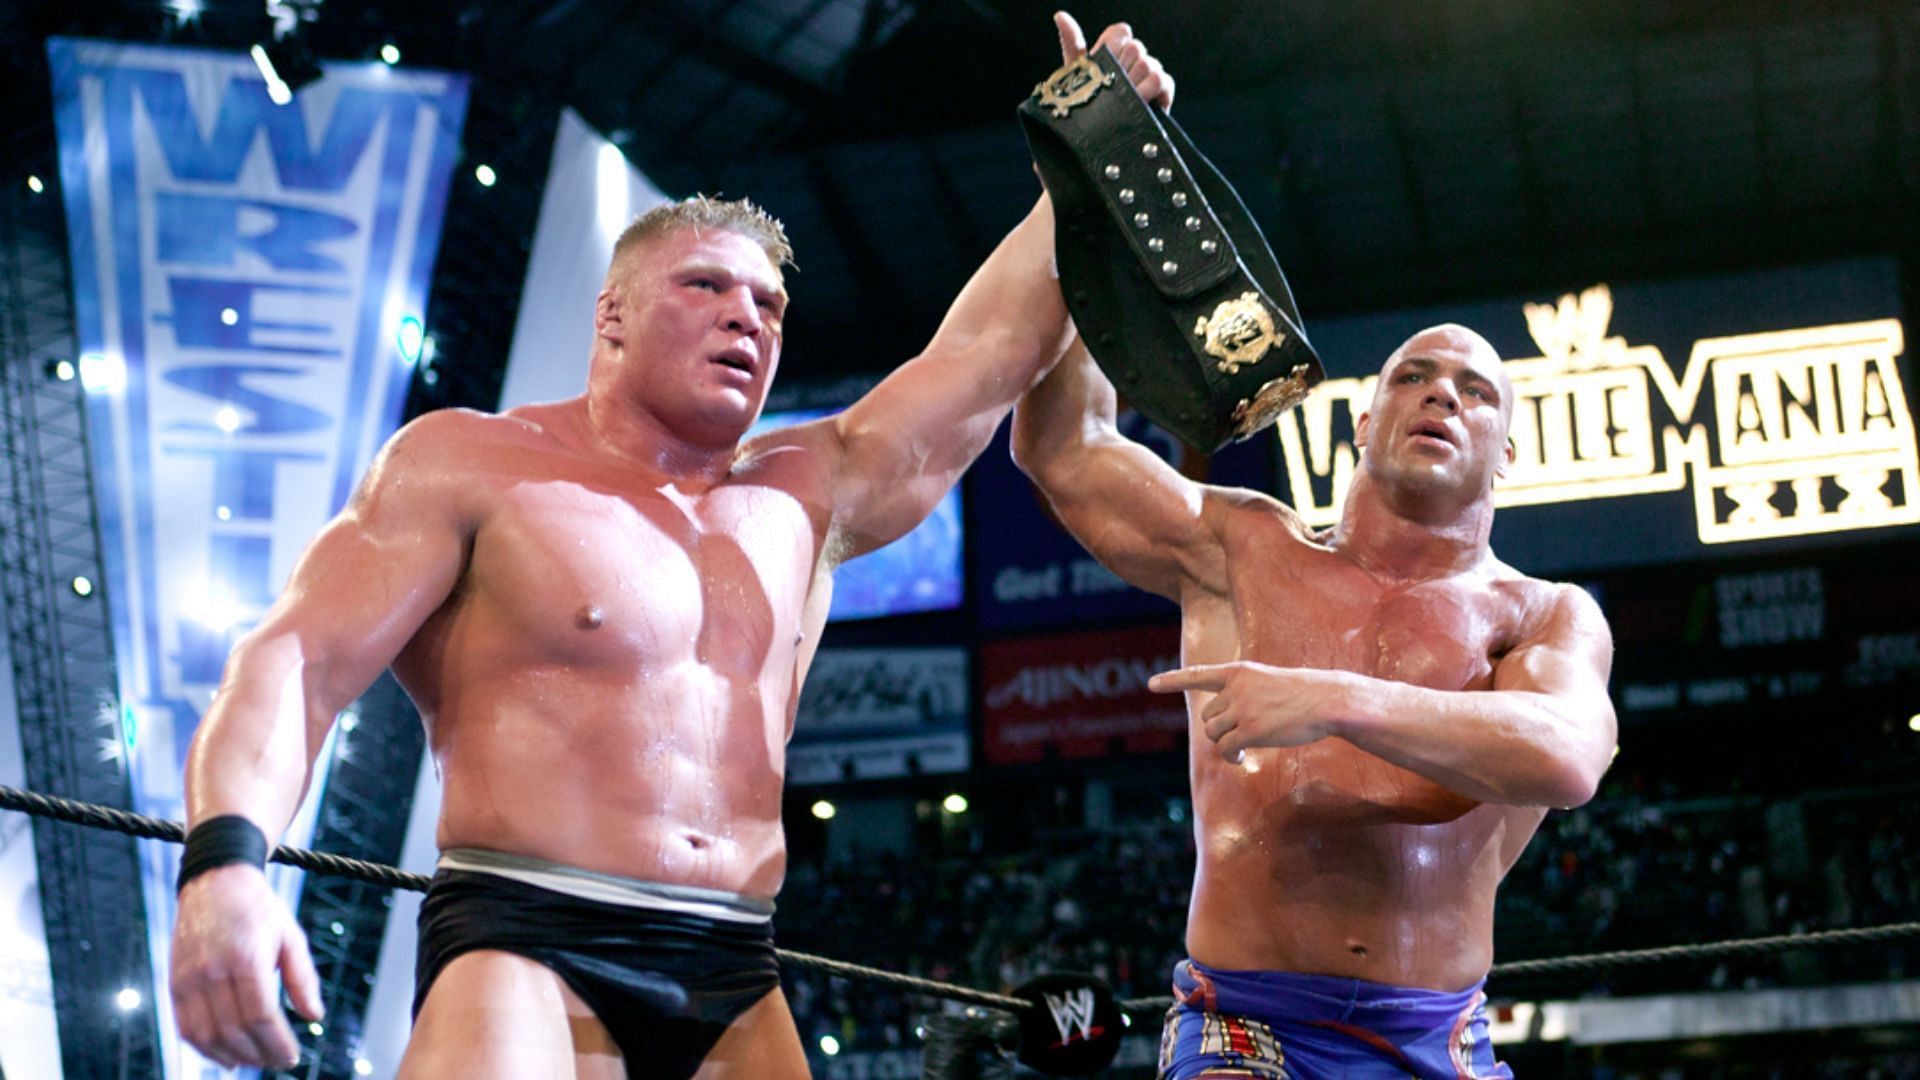 Brock Lesnar vs. Kurt Angle is one of the best WrestleMania main events of all time.